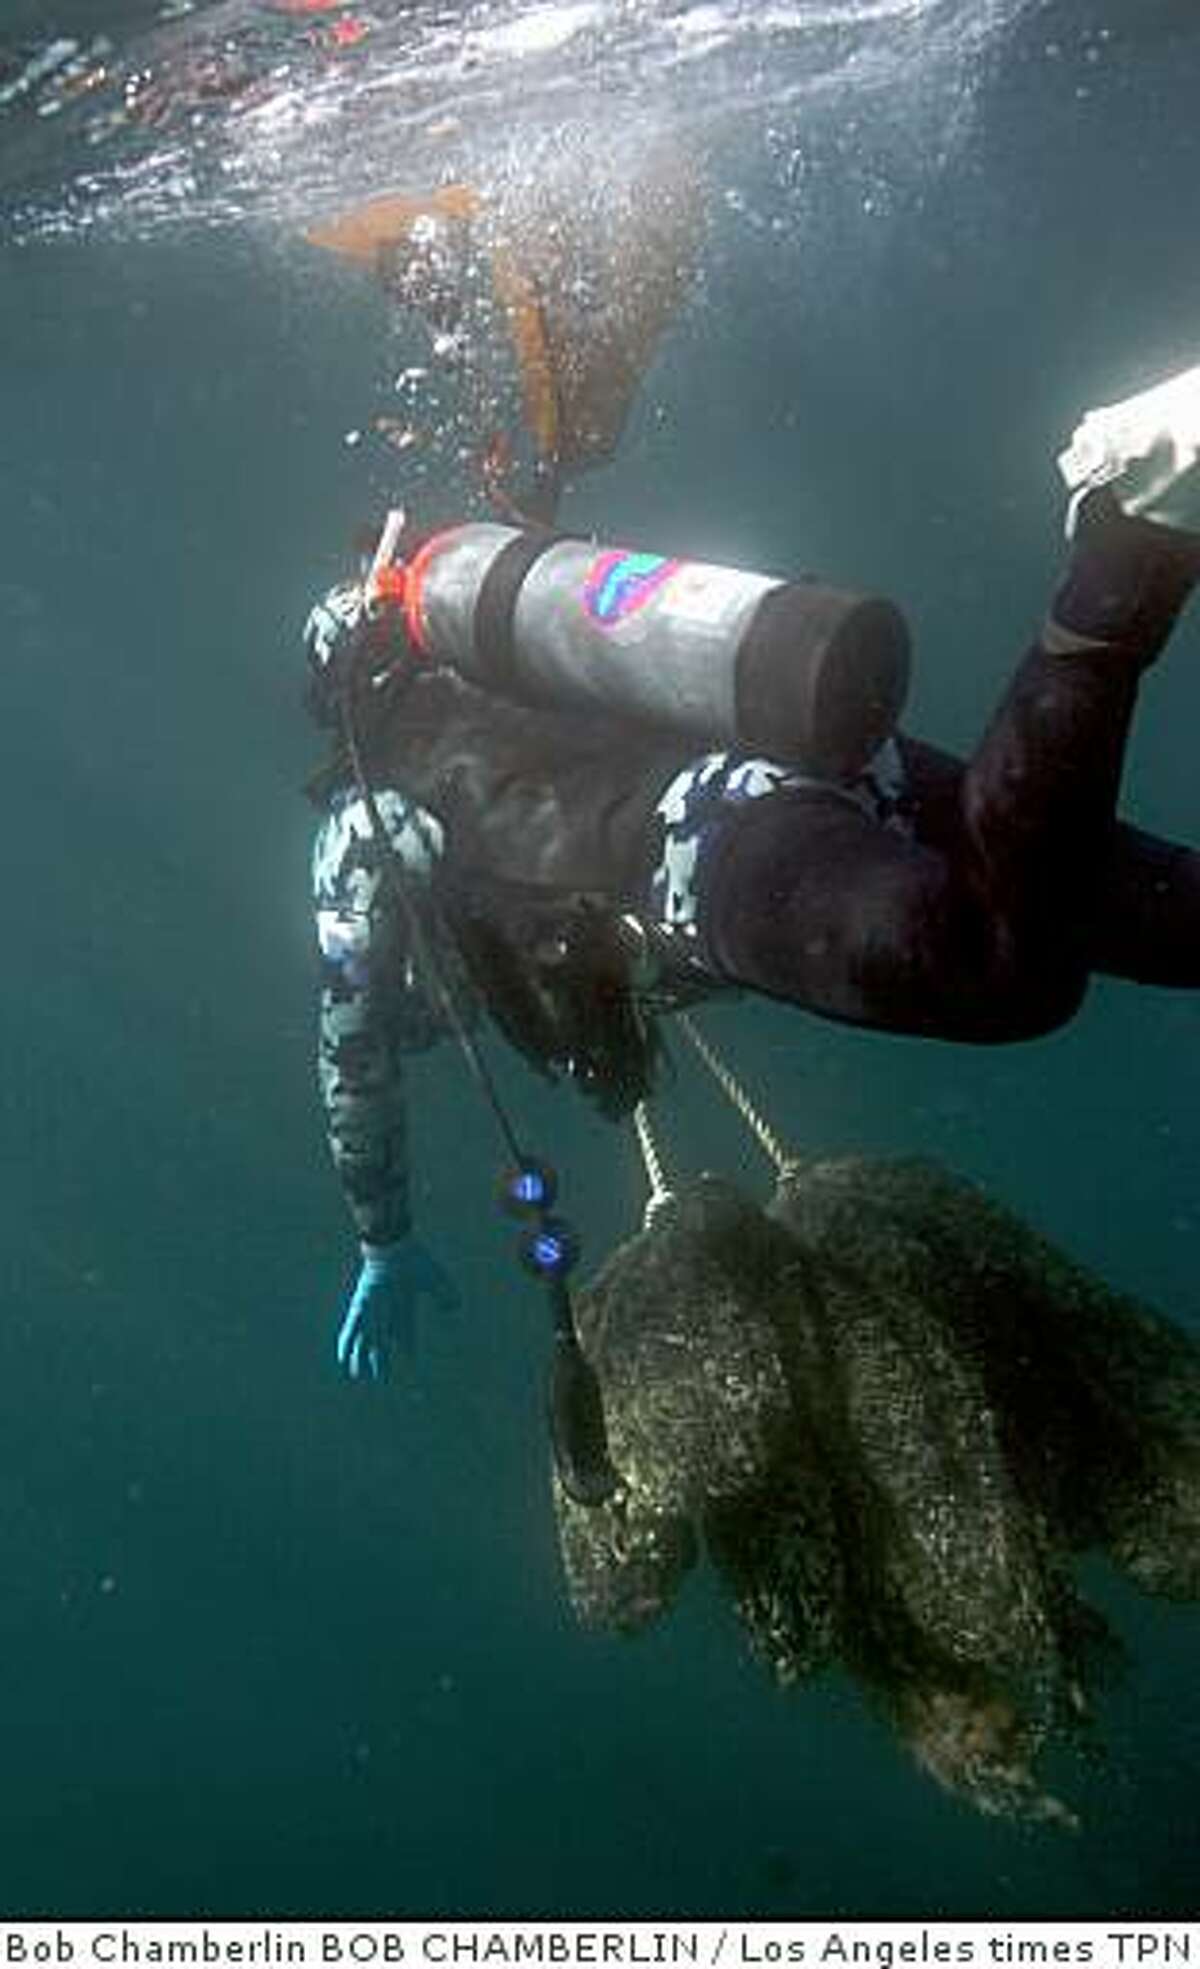 Dive team leader Jason Manix nears the surface with a load as he and other divers work to cut a fishing net off the trawler Infidel, which sank in 2006. Illustrates CATALINA-NET (category a) by Louis Sahagun (c) 2009, Los Angeles Times. Moved Friday, Jan. 16, 2009. (MUST CREDIT: Los Angeles Times photo by Bob Chamberlin.) Dive team leader Jason Manix nears the surface with a load as he and other divers work to cut a fishing net off the trawler Infidel, which sank in 2006. Illustrates CATALINA-NET (category a) by Louis Sahagun (c) 2009, Los Angeles Times. Moved Friday, Jan. 16, 2009. (MUST CREDIT: Los Angeles Times photo by Bob Chamberlin.)